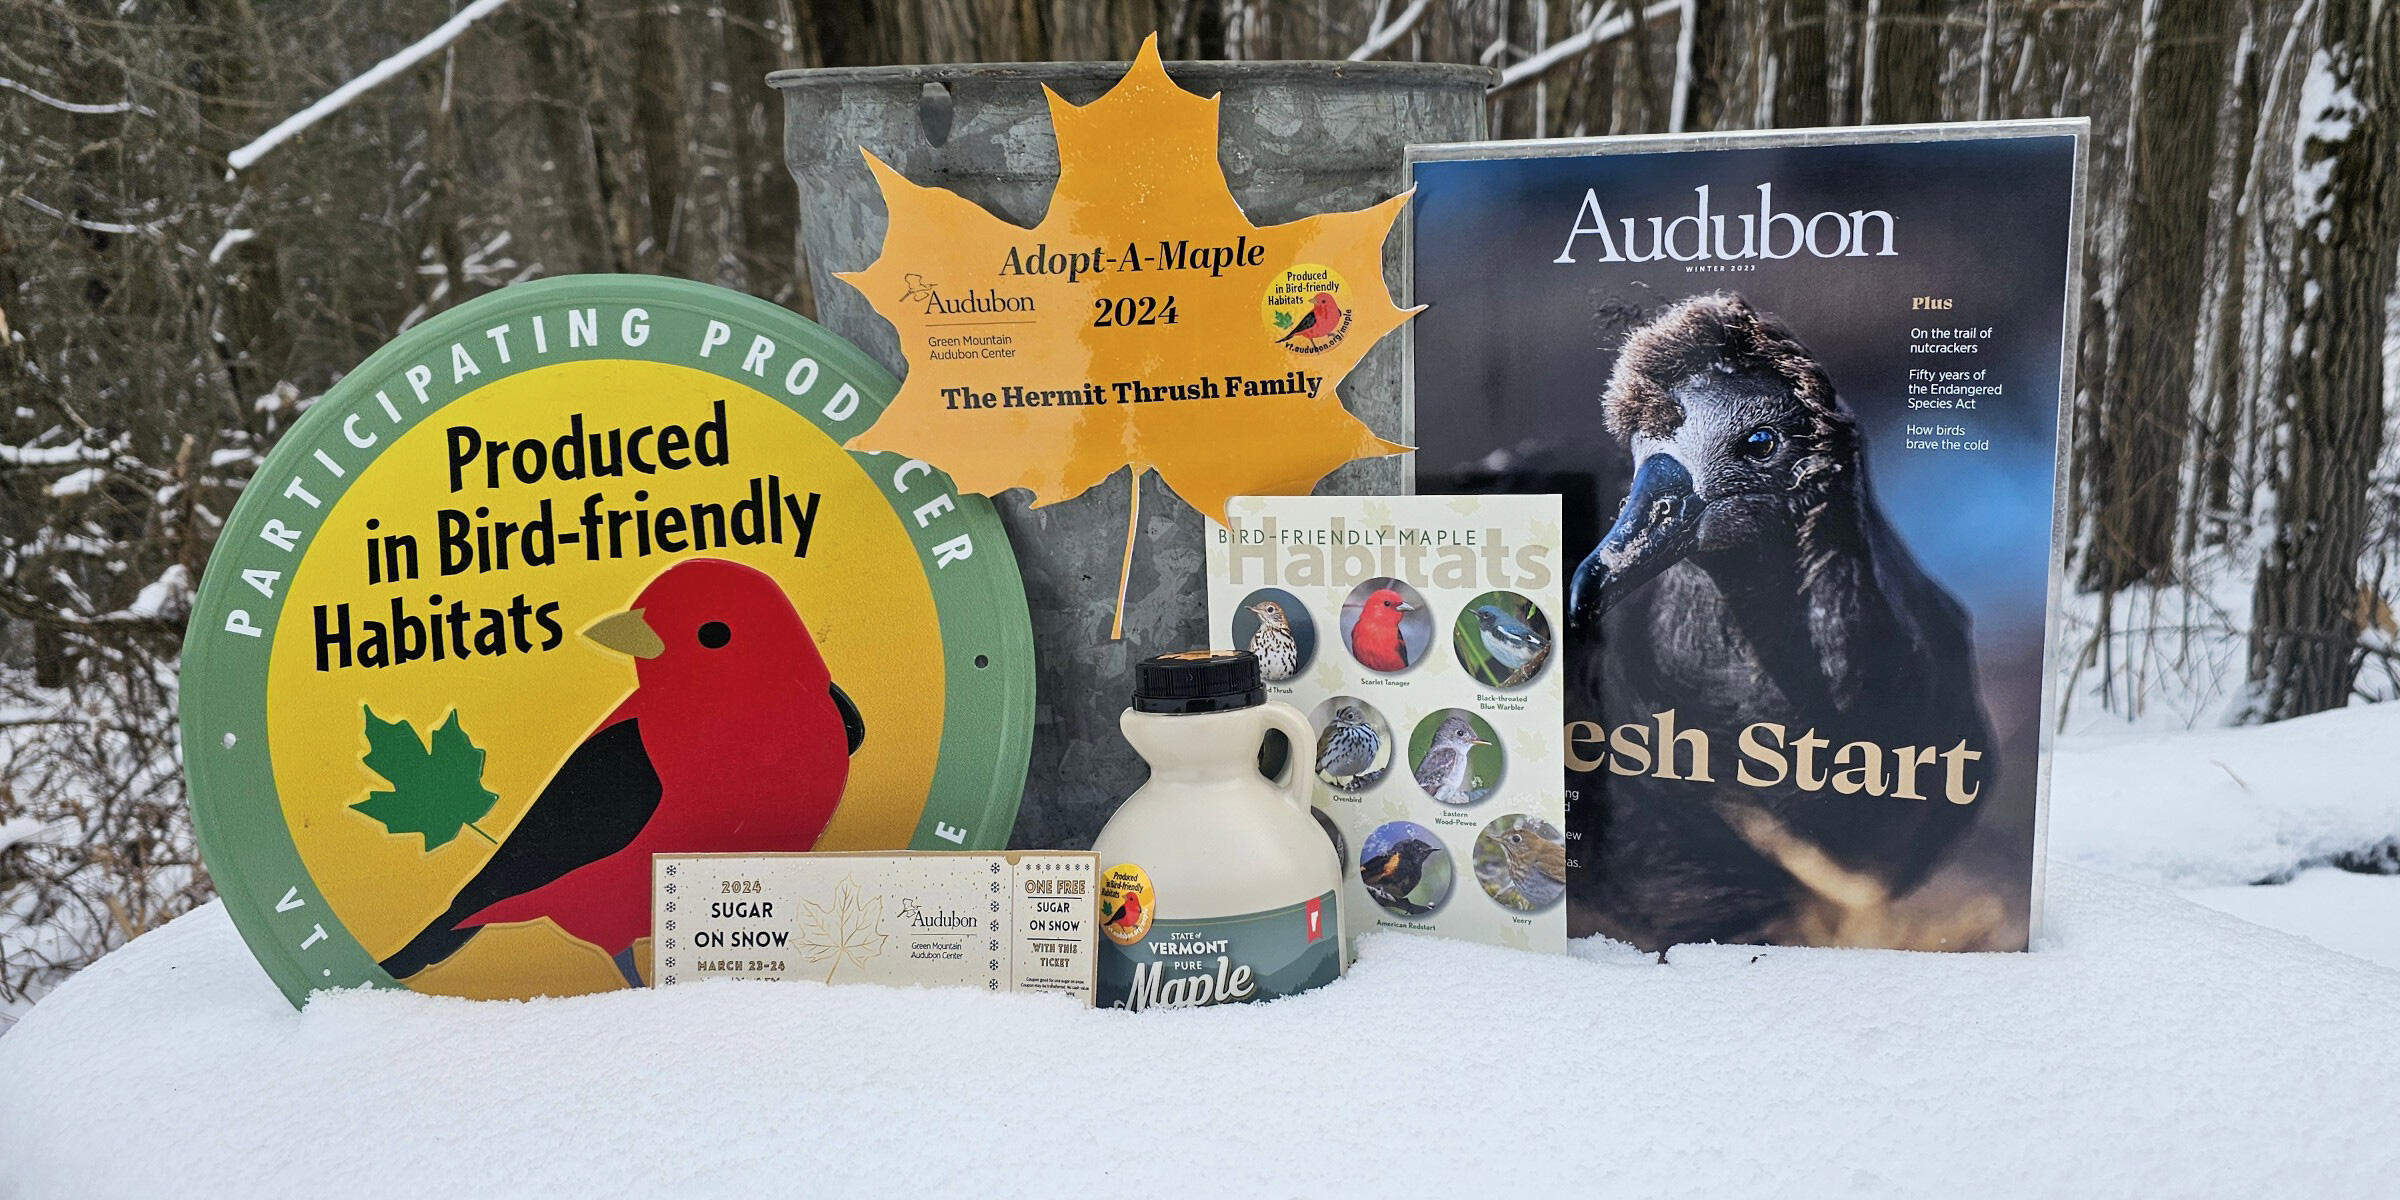 A photo displaying the Adopt-a-Maple bundle items, arranged together in the snow.